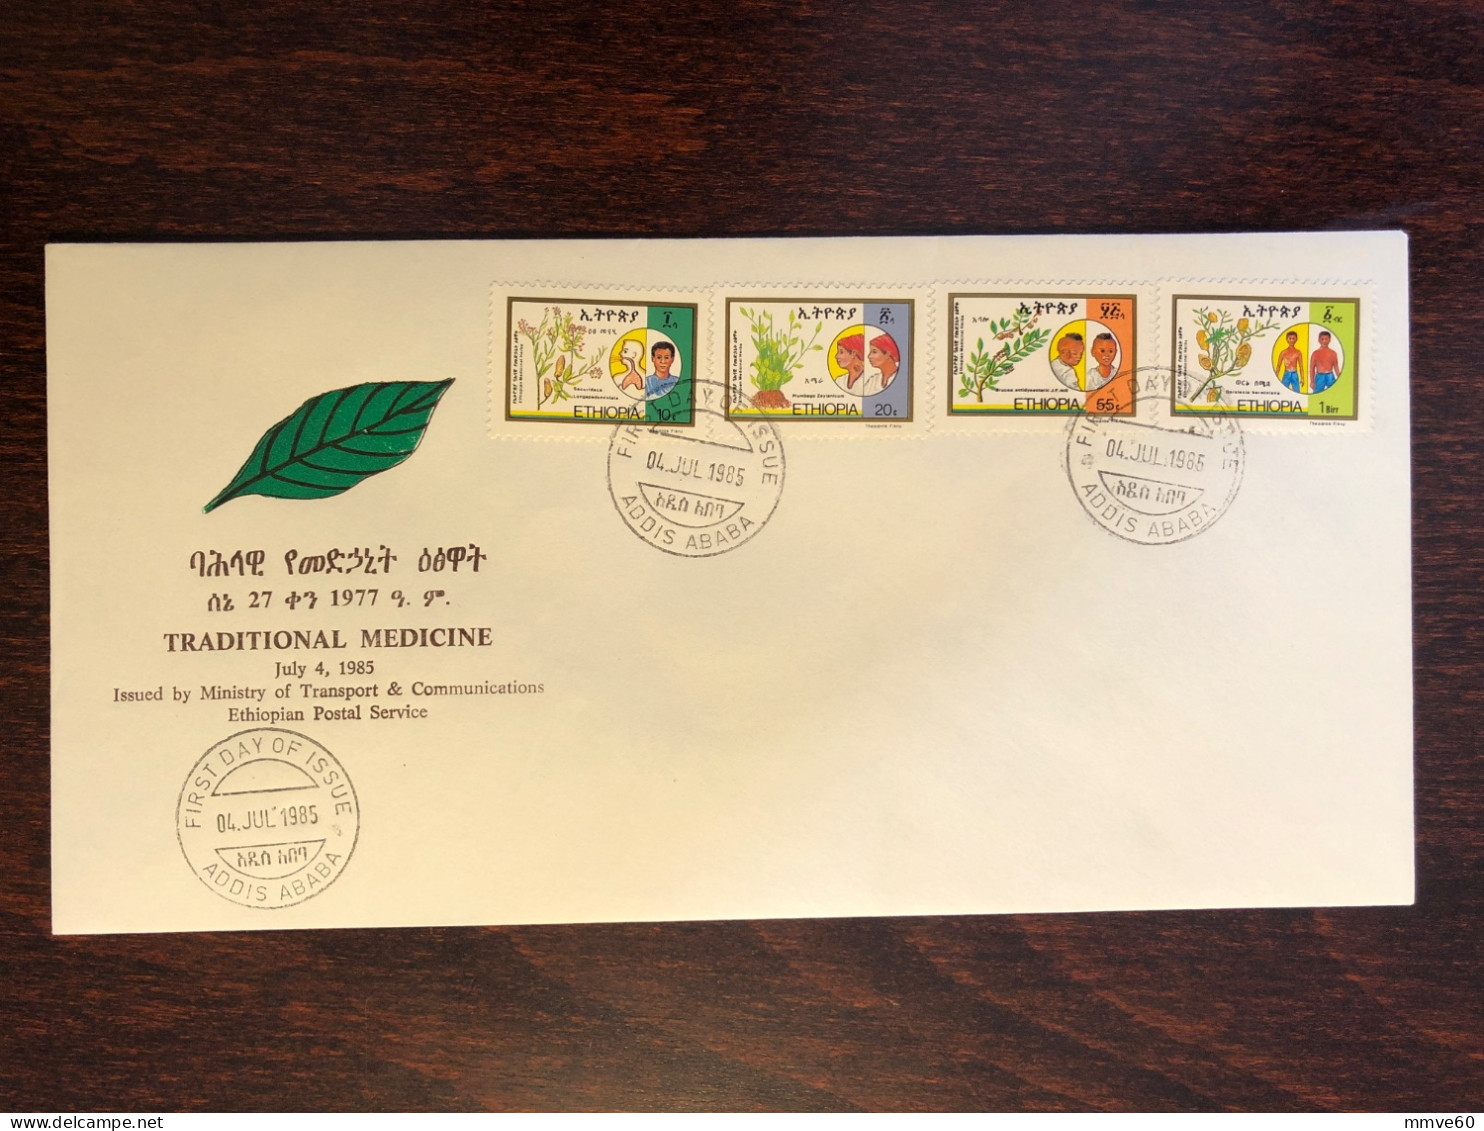 ETHIOPIA FDC COVER 1985 YEAR TRADITIONAL MEDICINE MEDICINAL PLANTS HEALTH MEDICINE STAMPS - Ethiopia